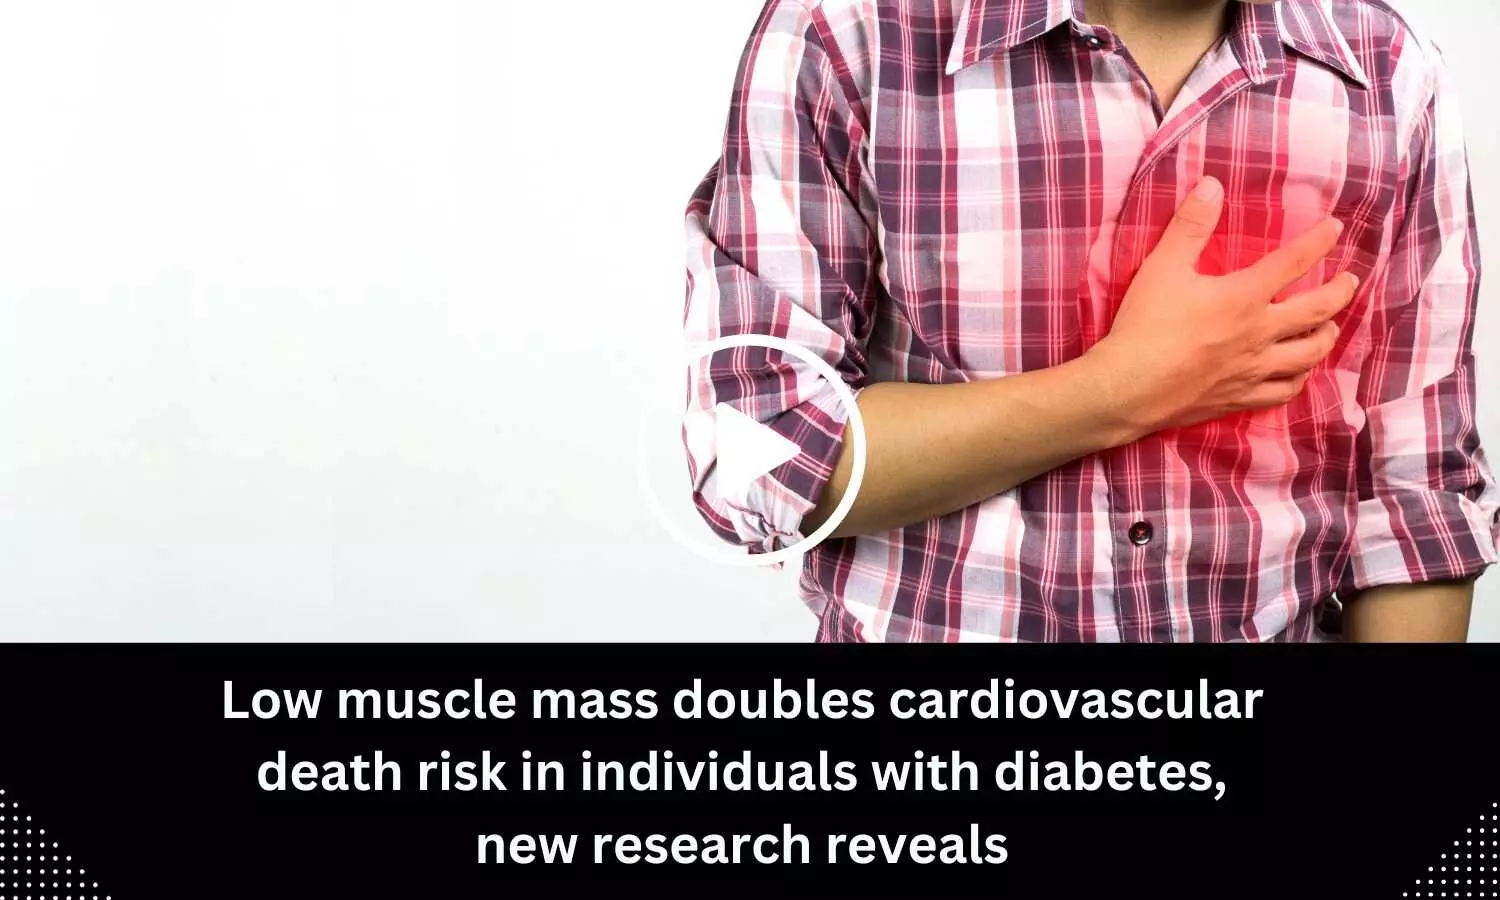 Low muscle mass doubles cardiovascular death risk in individuals with diabetes, new research reveals